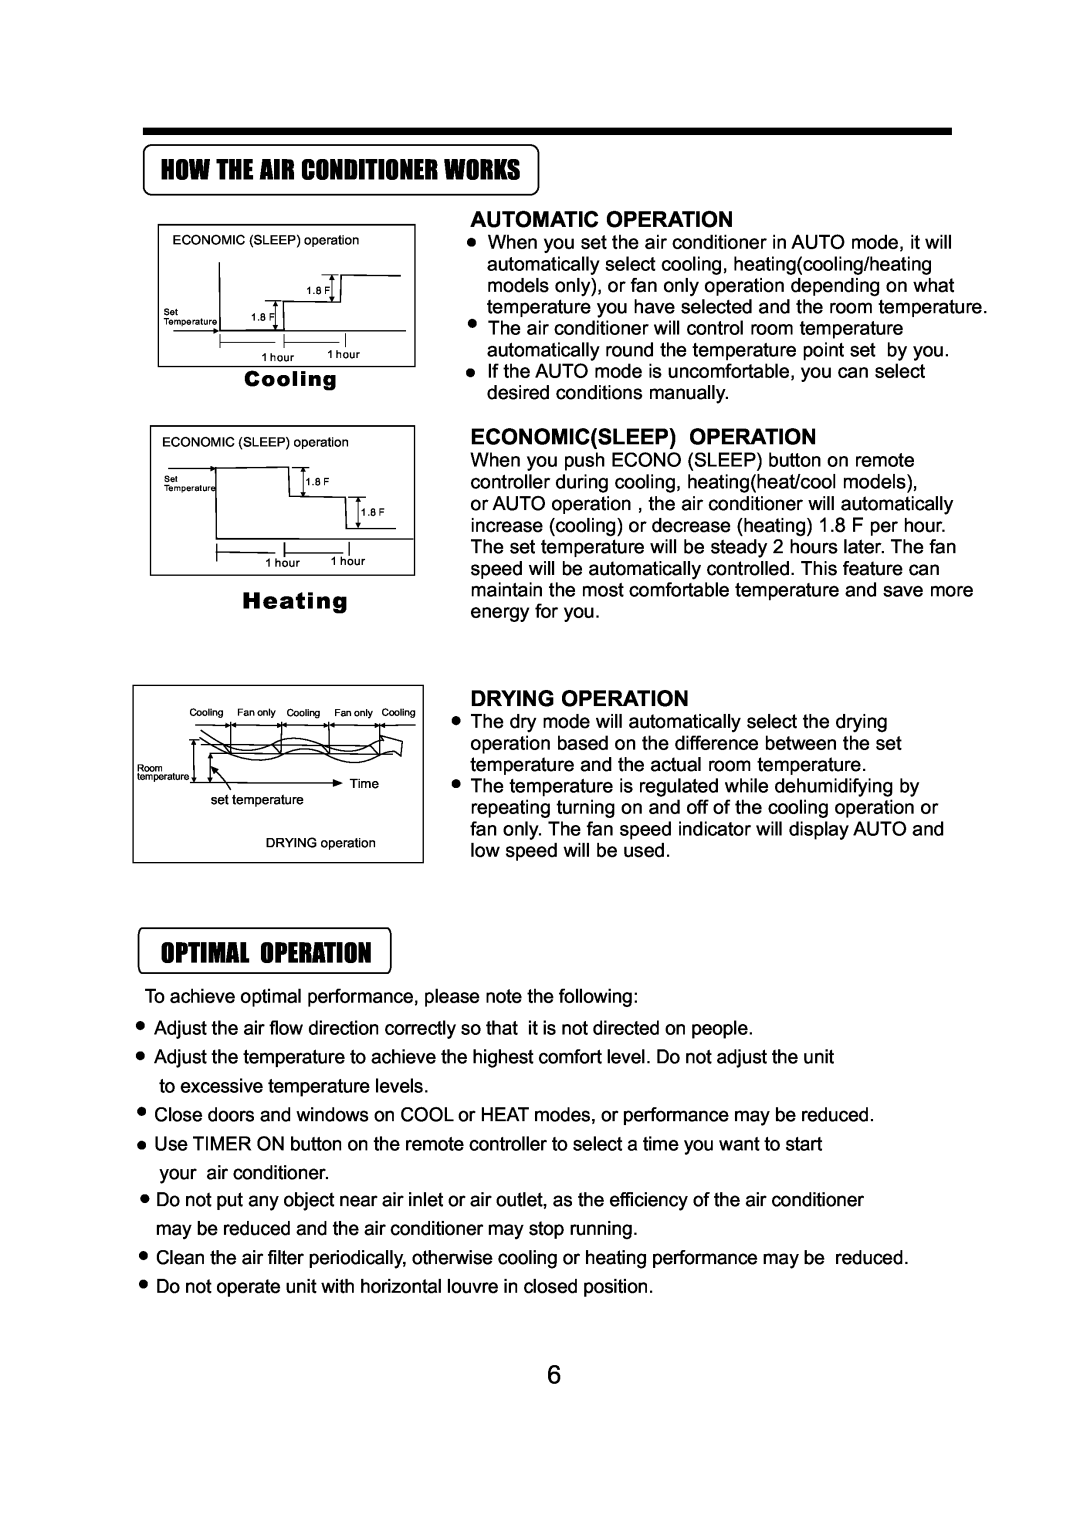 Heat Controller SMH, SMA owner manual How The Air Conditioner Works, Optimal Operation, Heating, Cooling 